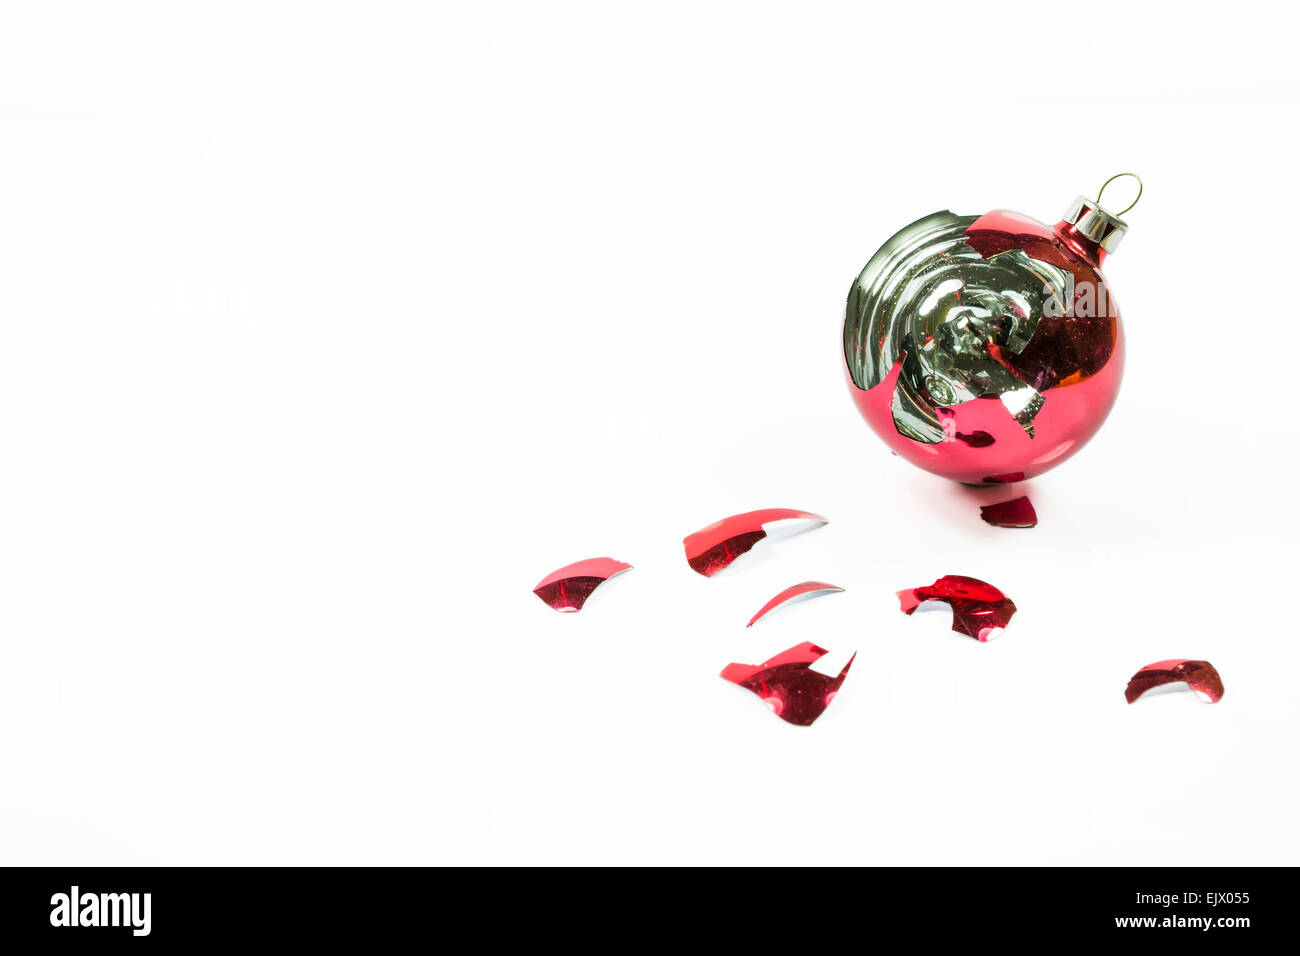 Christmas red glass ball broken with scattered shards, on white background Stock Photo